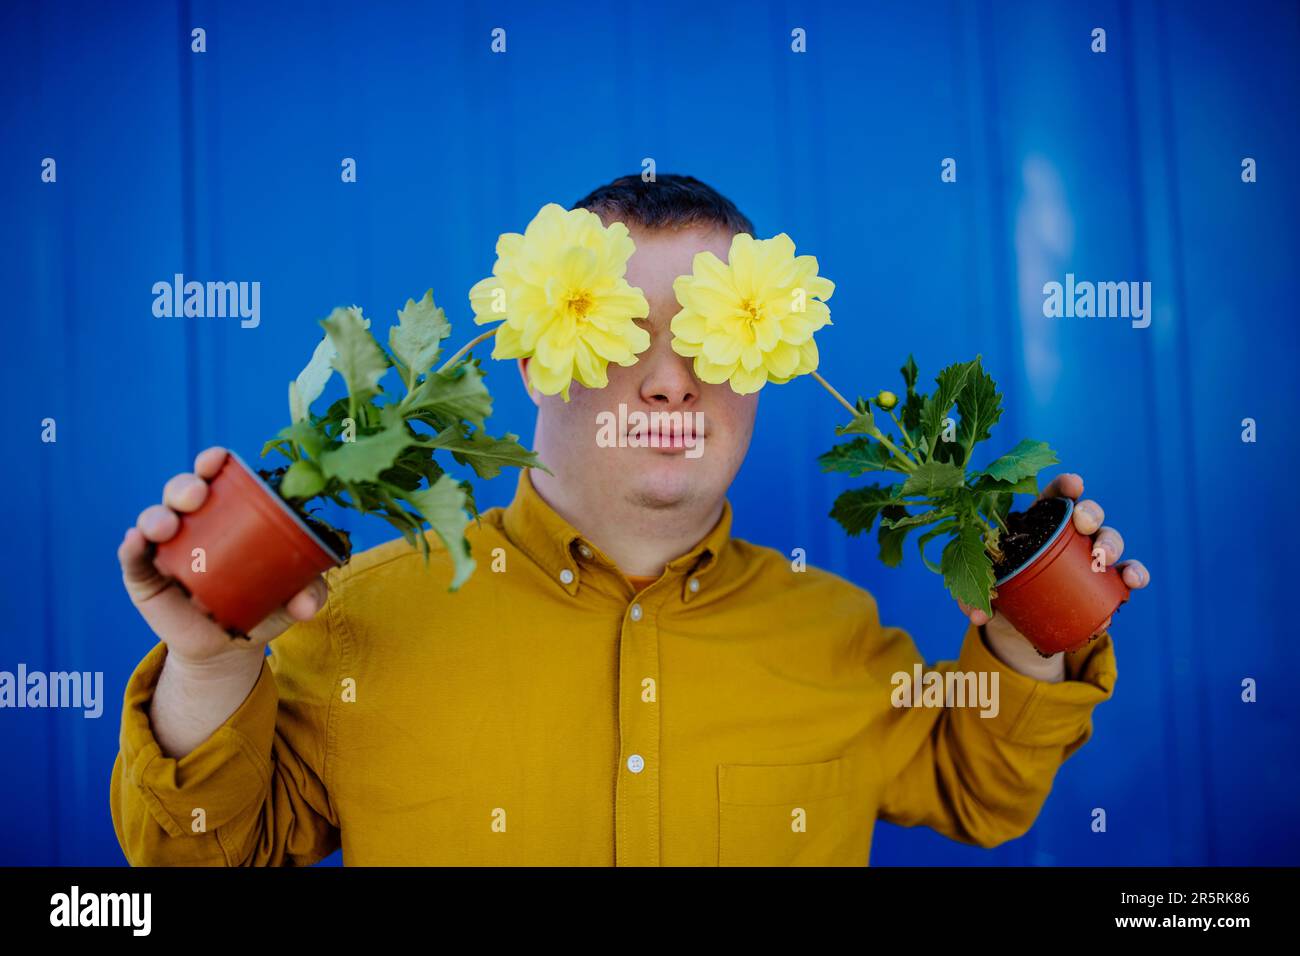 Happy young man with Down syndrome making funny grimace and holding pot flowers against blue background. Stock Photo